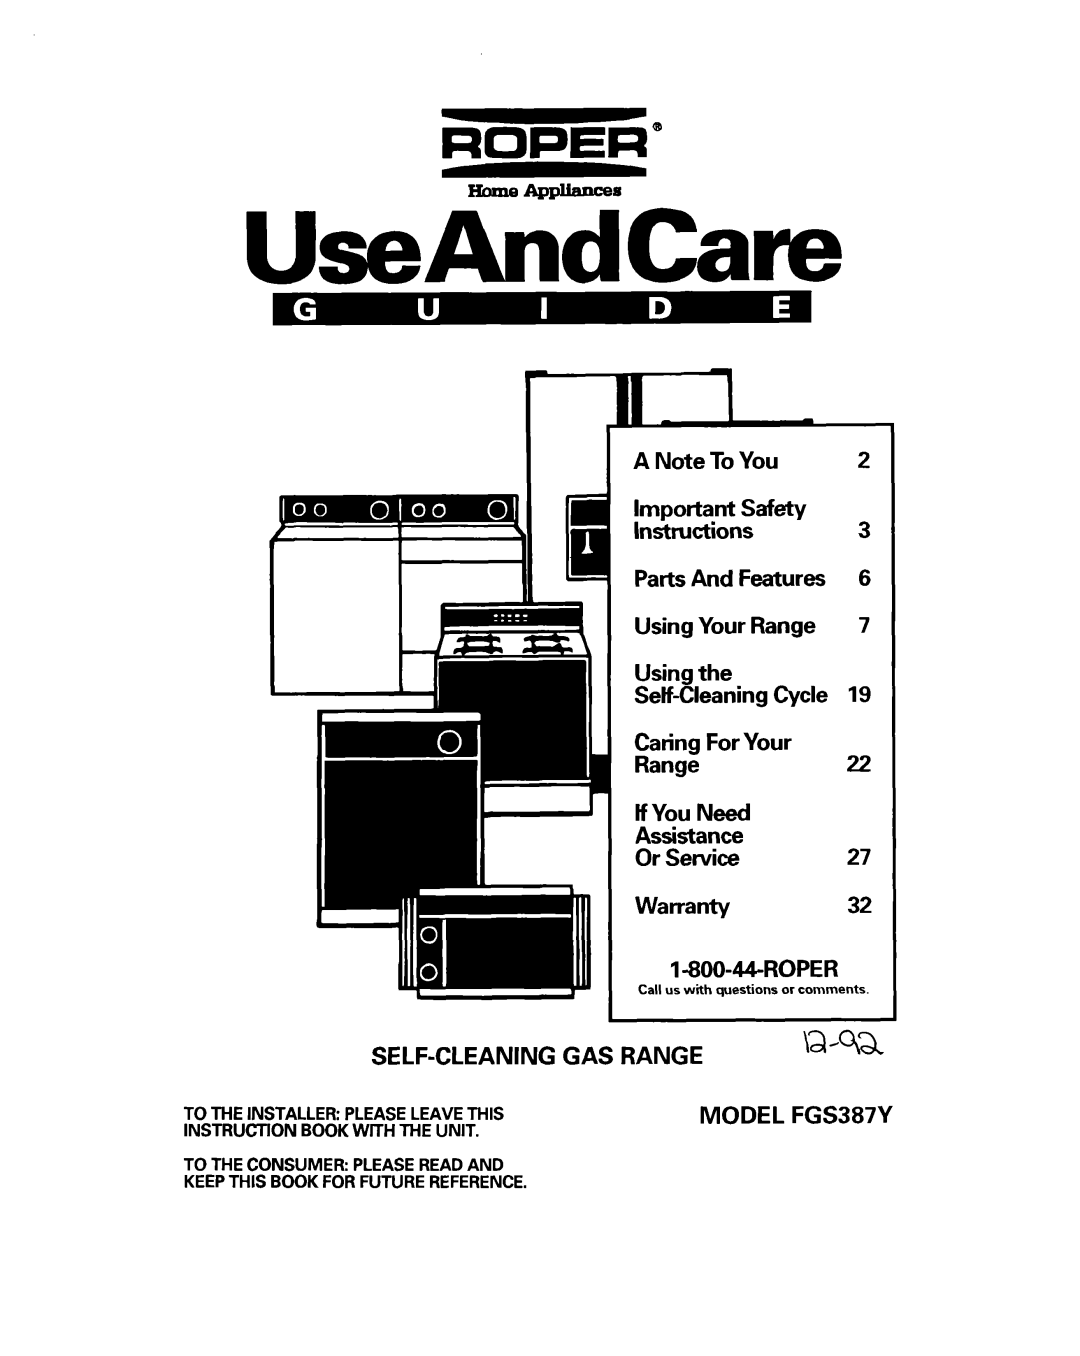 Whirlpool FGS387Y manual UseAndCave, A Note To You, Important Safety Instructions3 Parts And Features, l-800-44-ROPER 